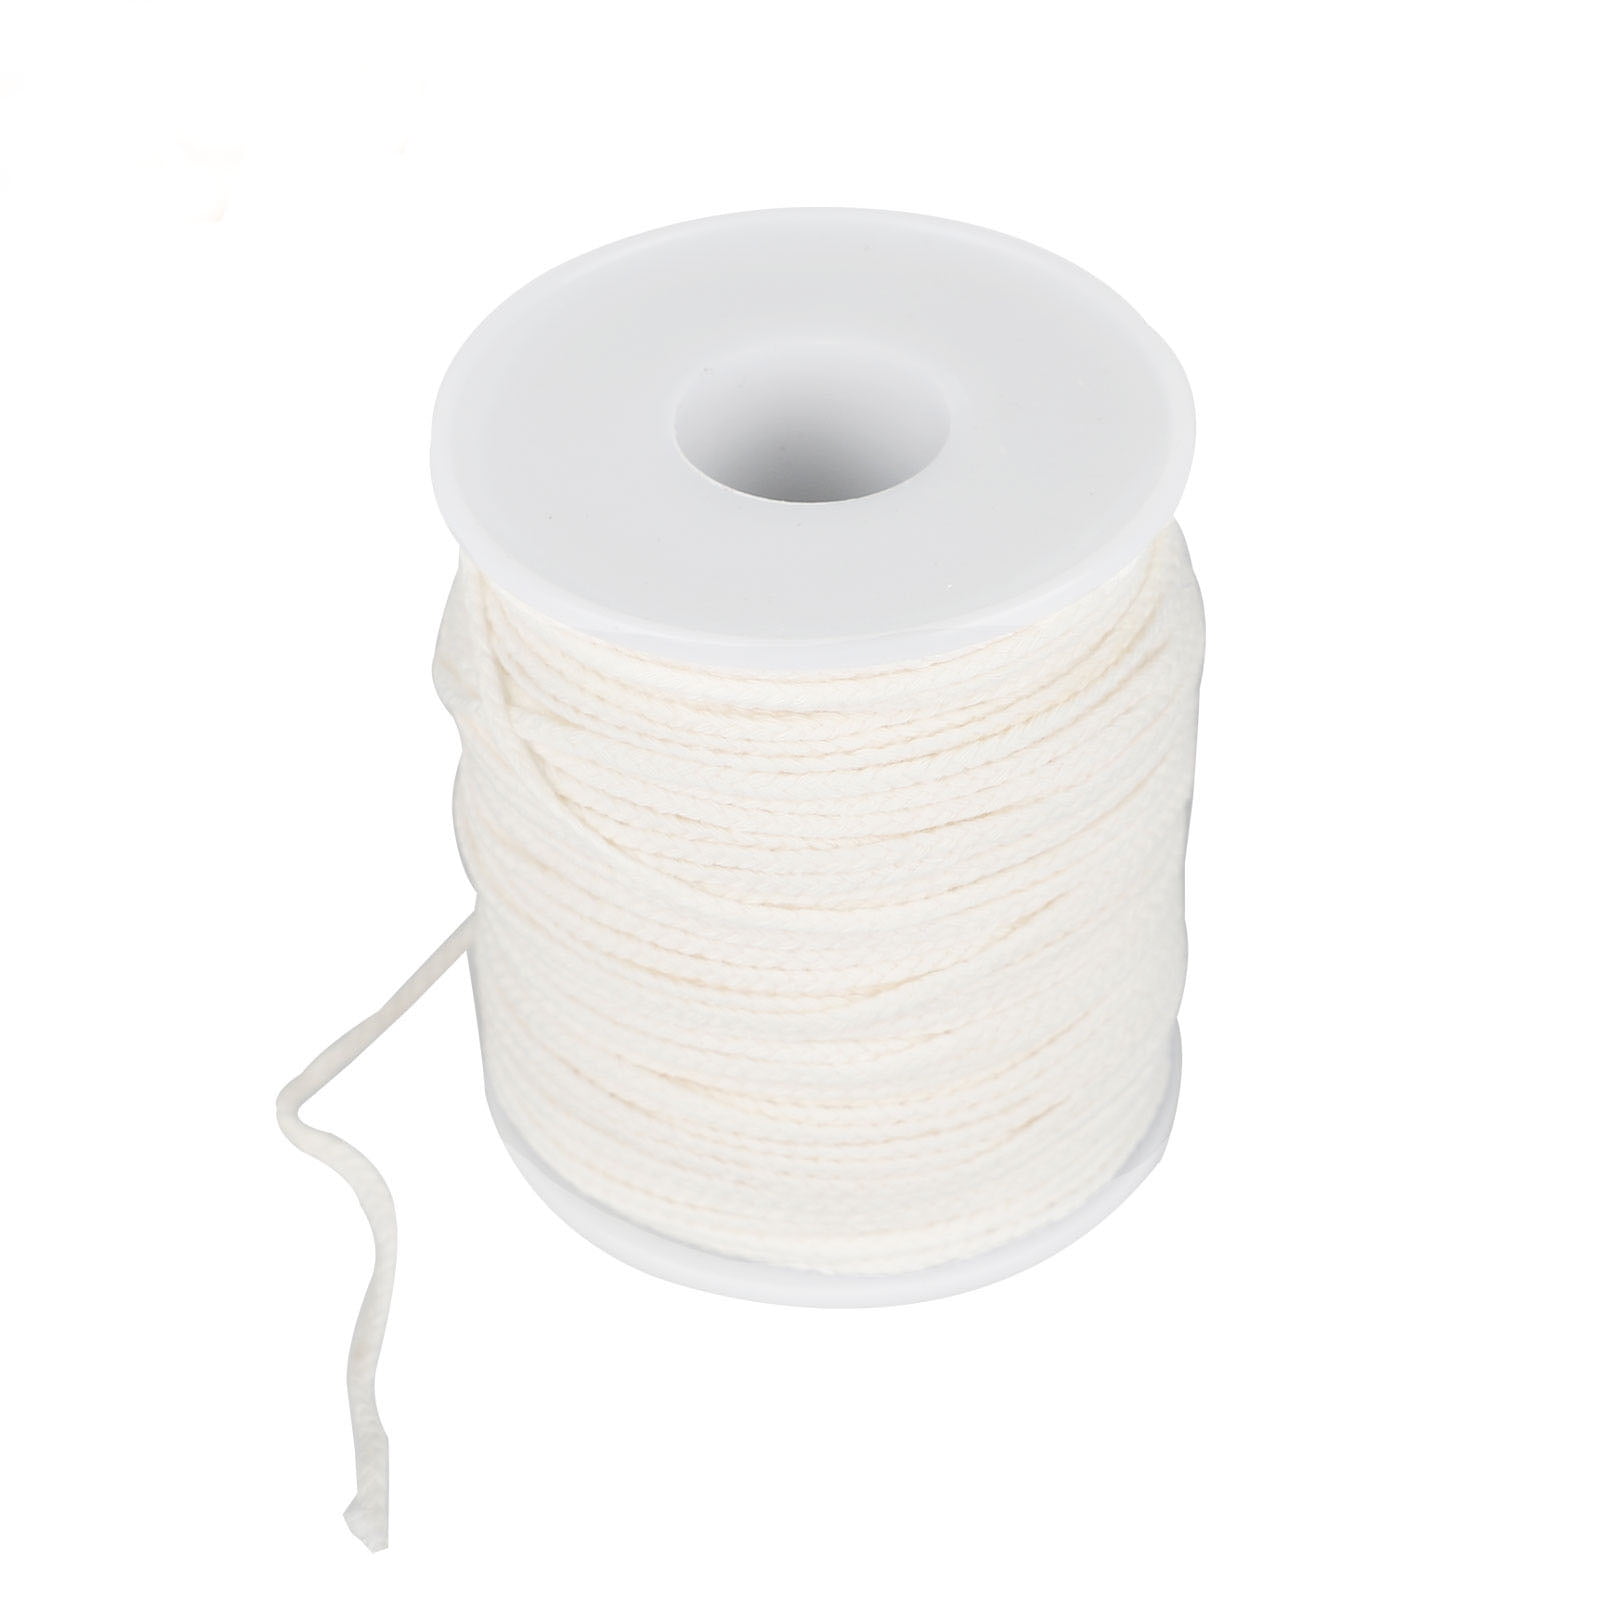 200FT 61M Cotton Candle Wicks Spool Braided Wicks for DIY Candle Making ...